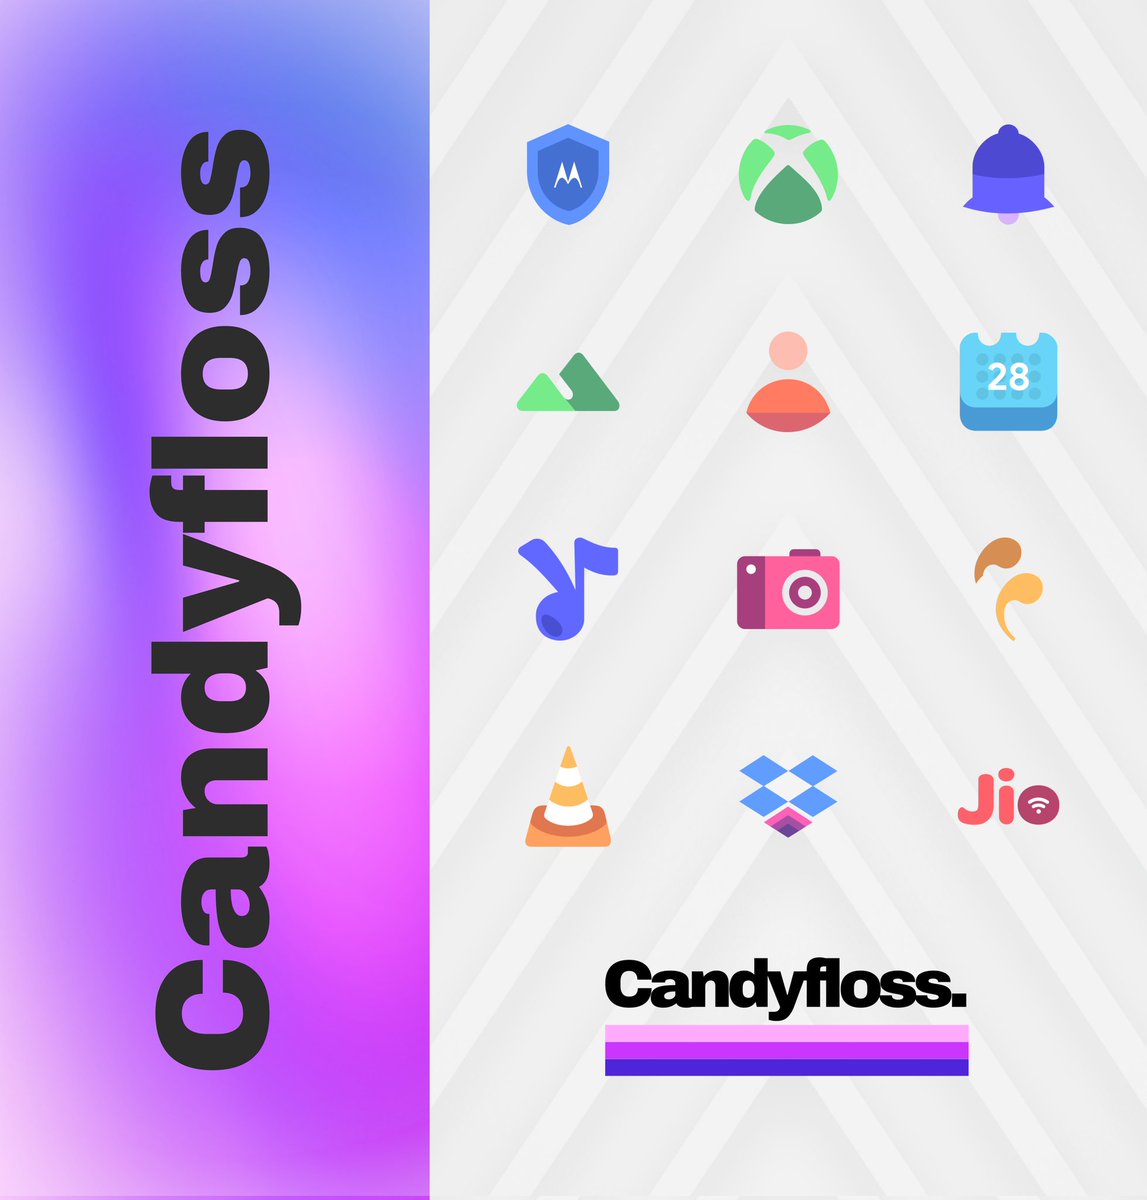 2nd update of the week for Candyfloss is live! We are cooking! 🔸 Added 30 new icons! 🔸 760+ total icons now! Get it here: bit.ly/CandyflossIcons RTs and ❤️s ll be highly appreciated! Cheers peeps!